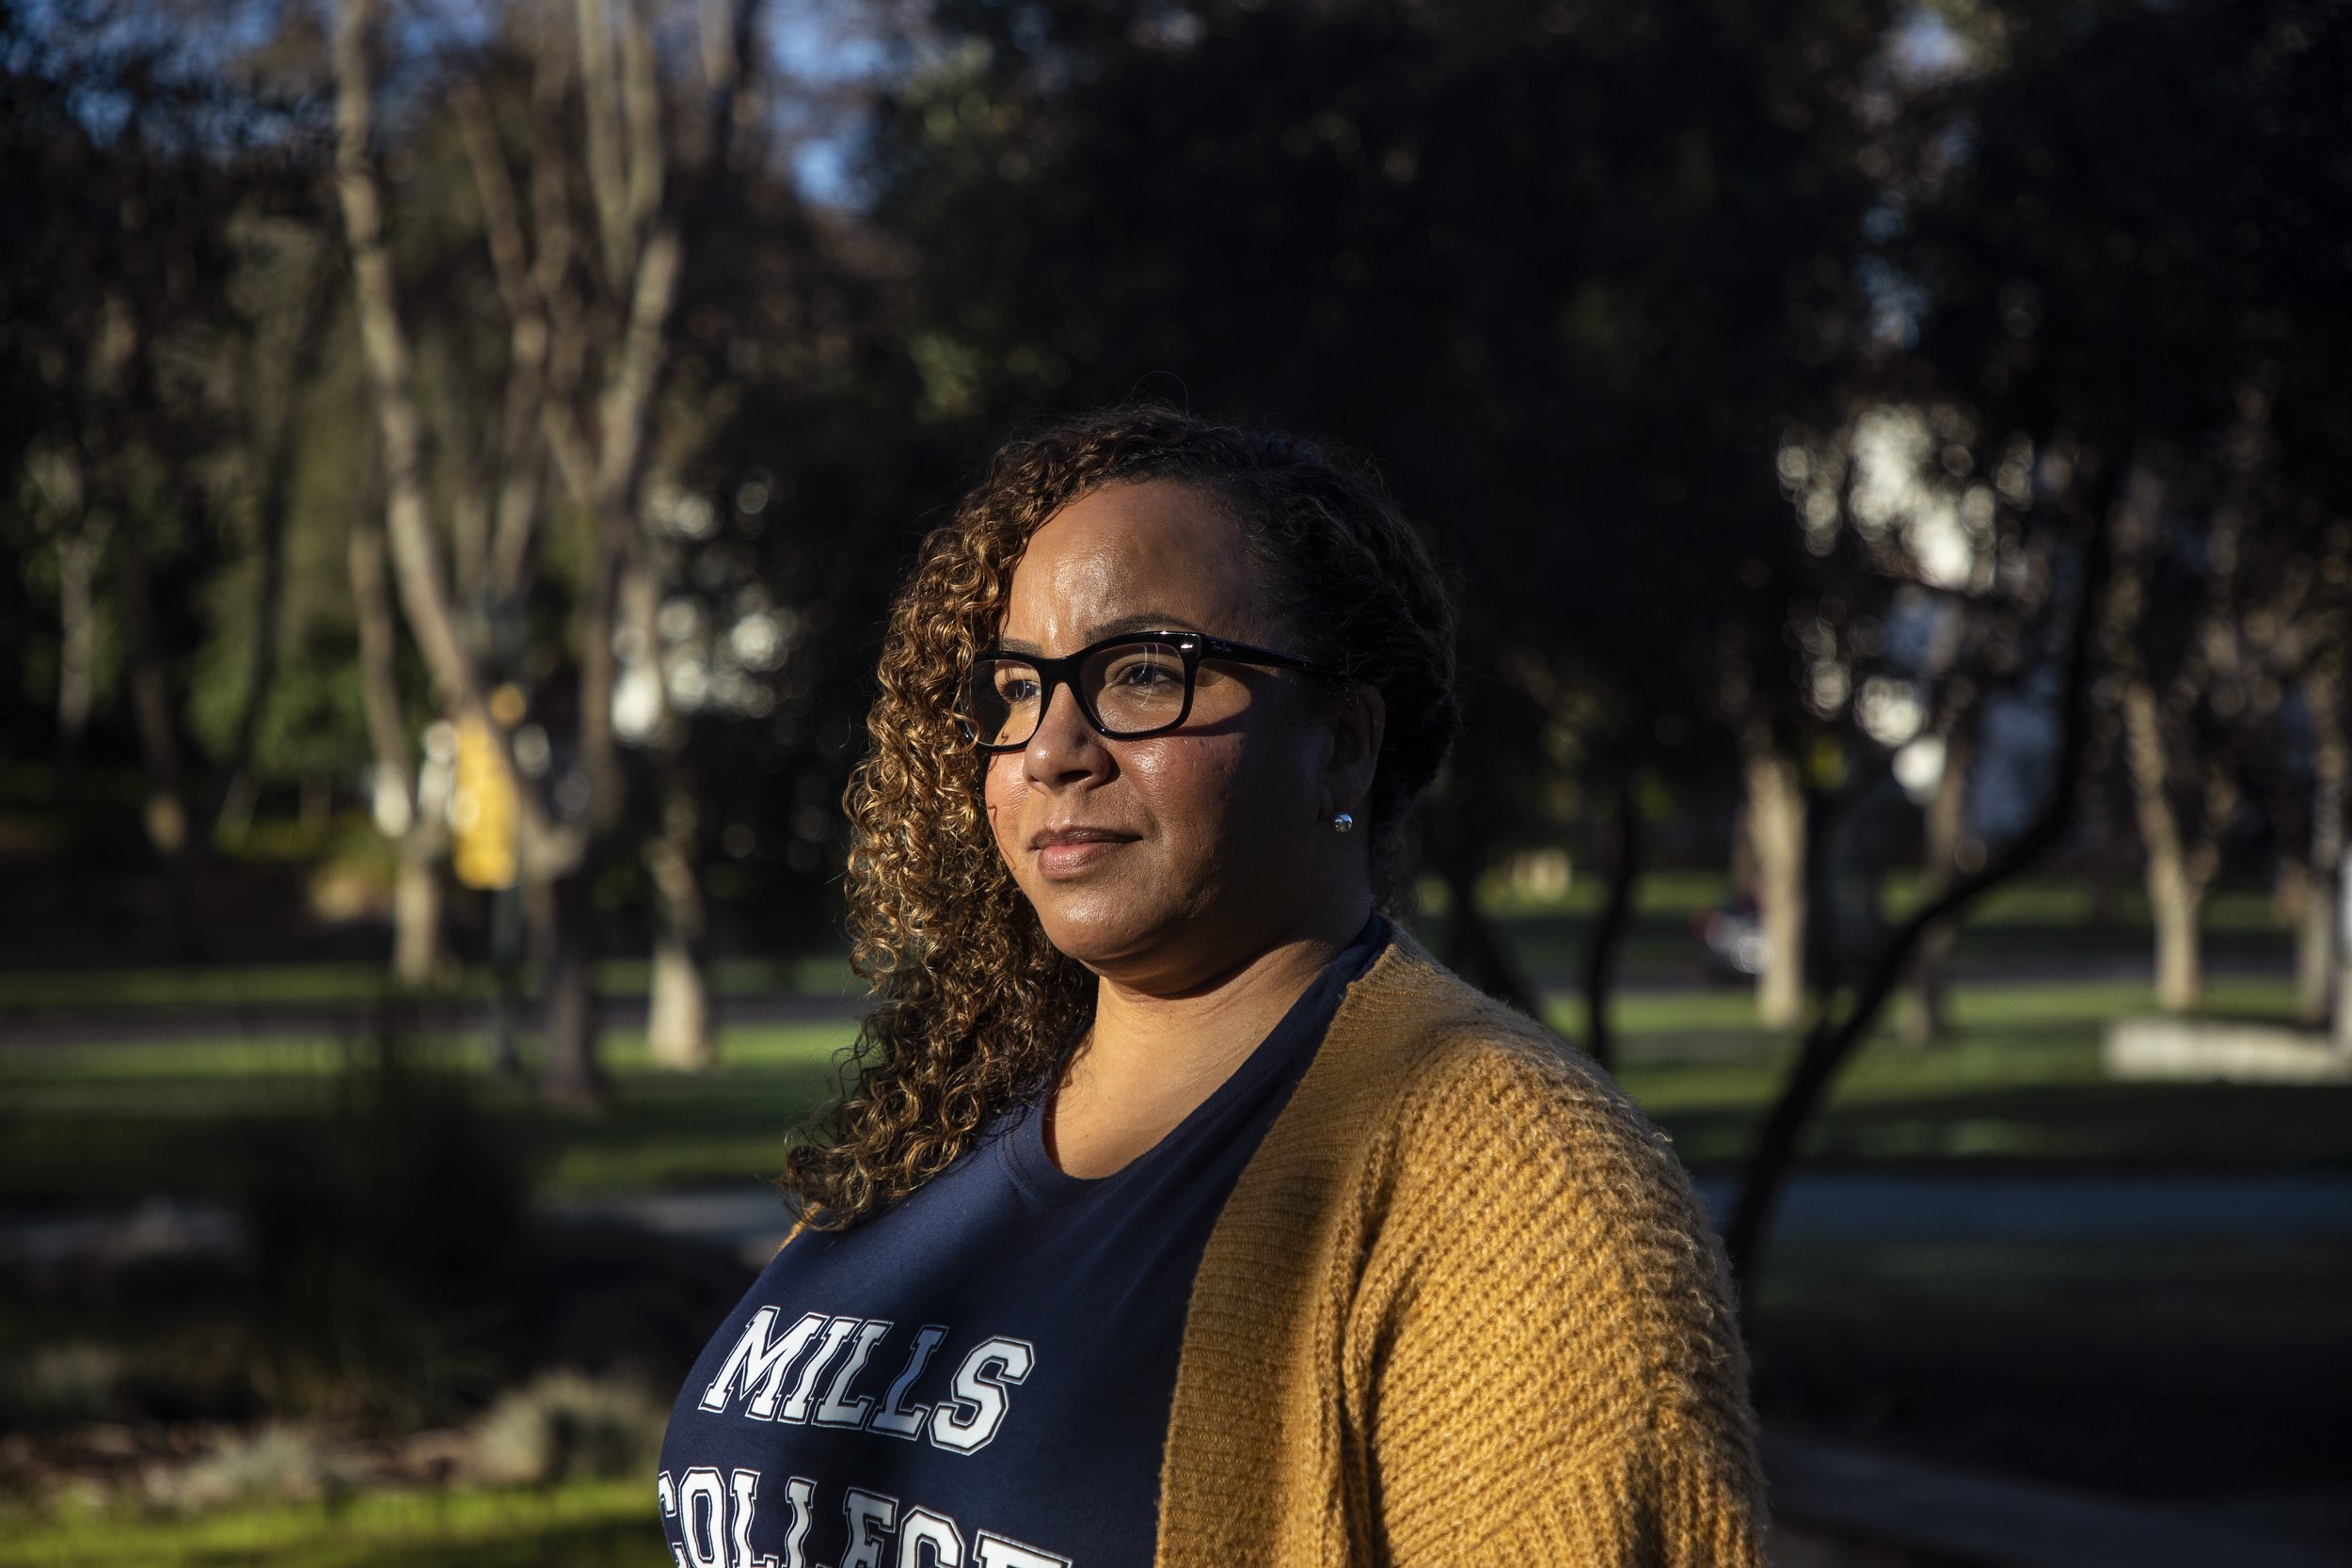  Shay Franco-Clausen stands out front of the Lokey School of Business and Public Policy at Mills College, where she is enrolled as a masters student on Jan.14, 2022. Photo by Martin do Nascimento/CalMatters 